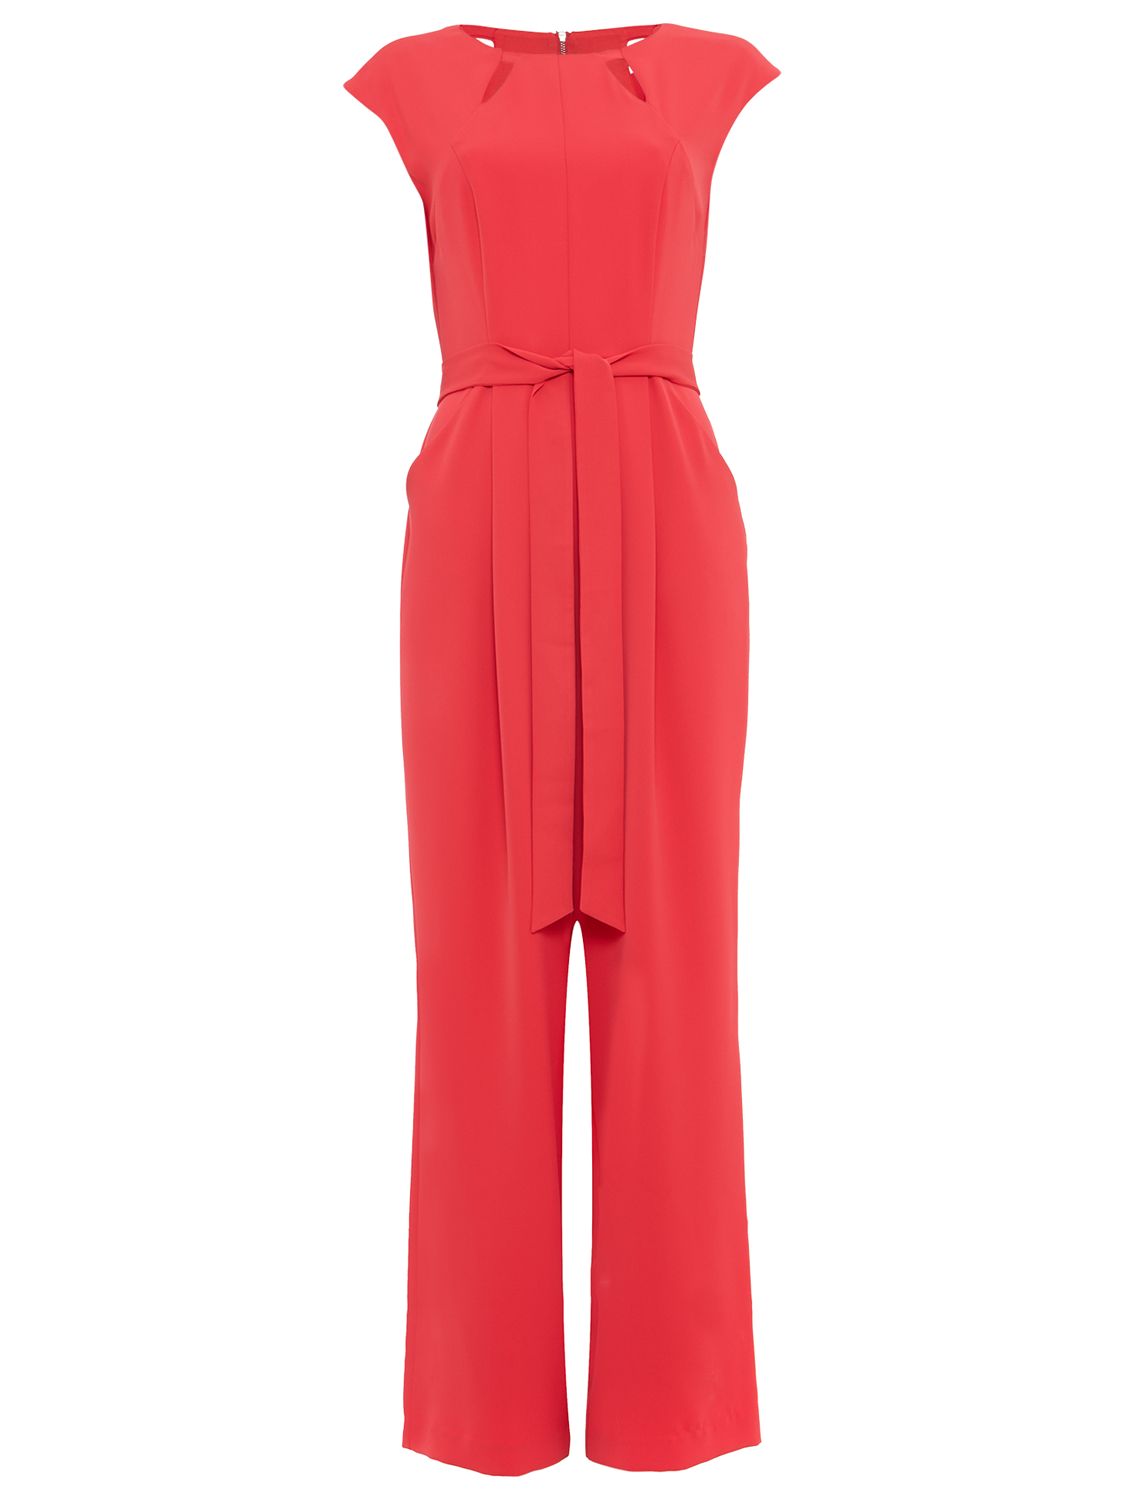 Phase Eight Polly Cut Out Jumpsuit, Hot Pink